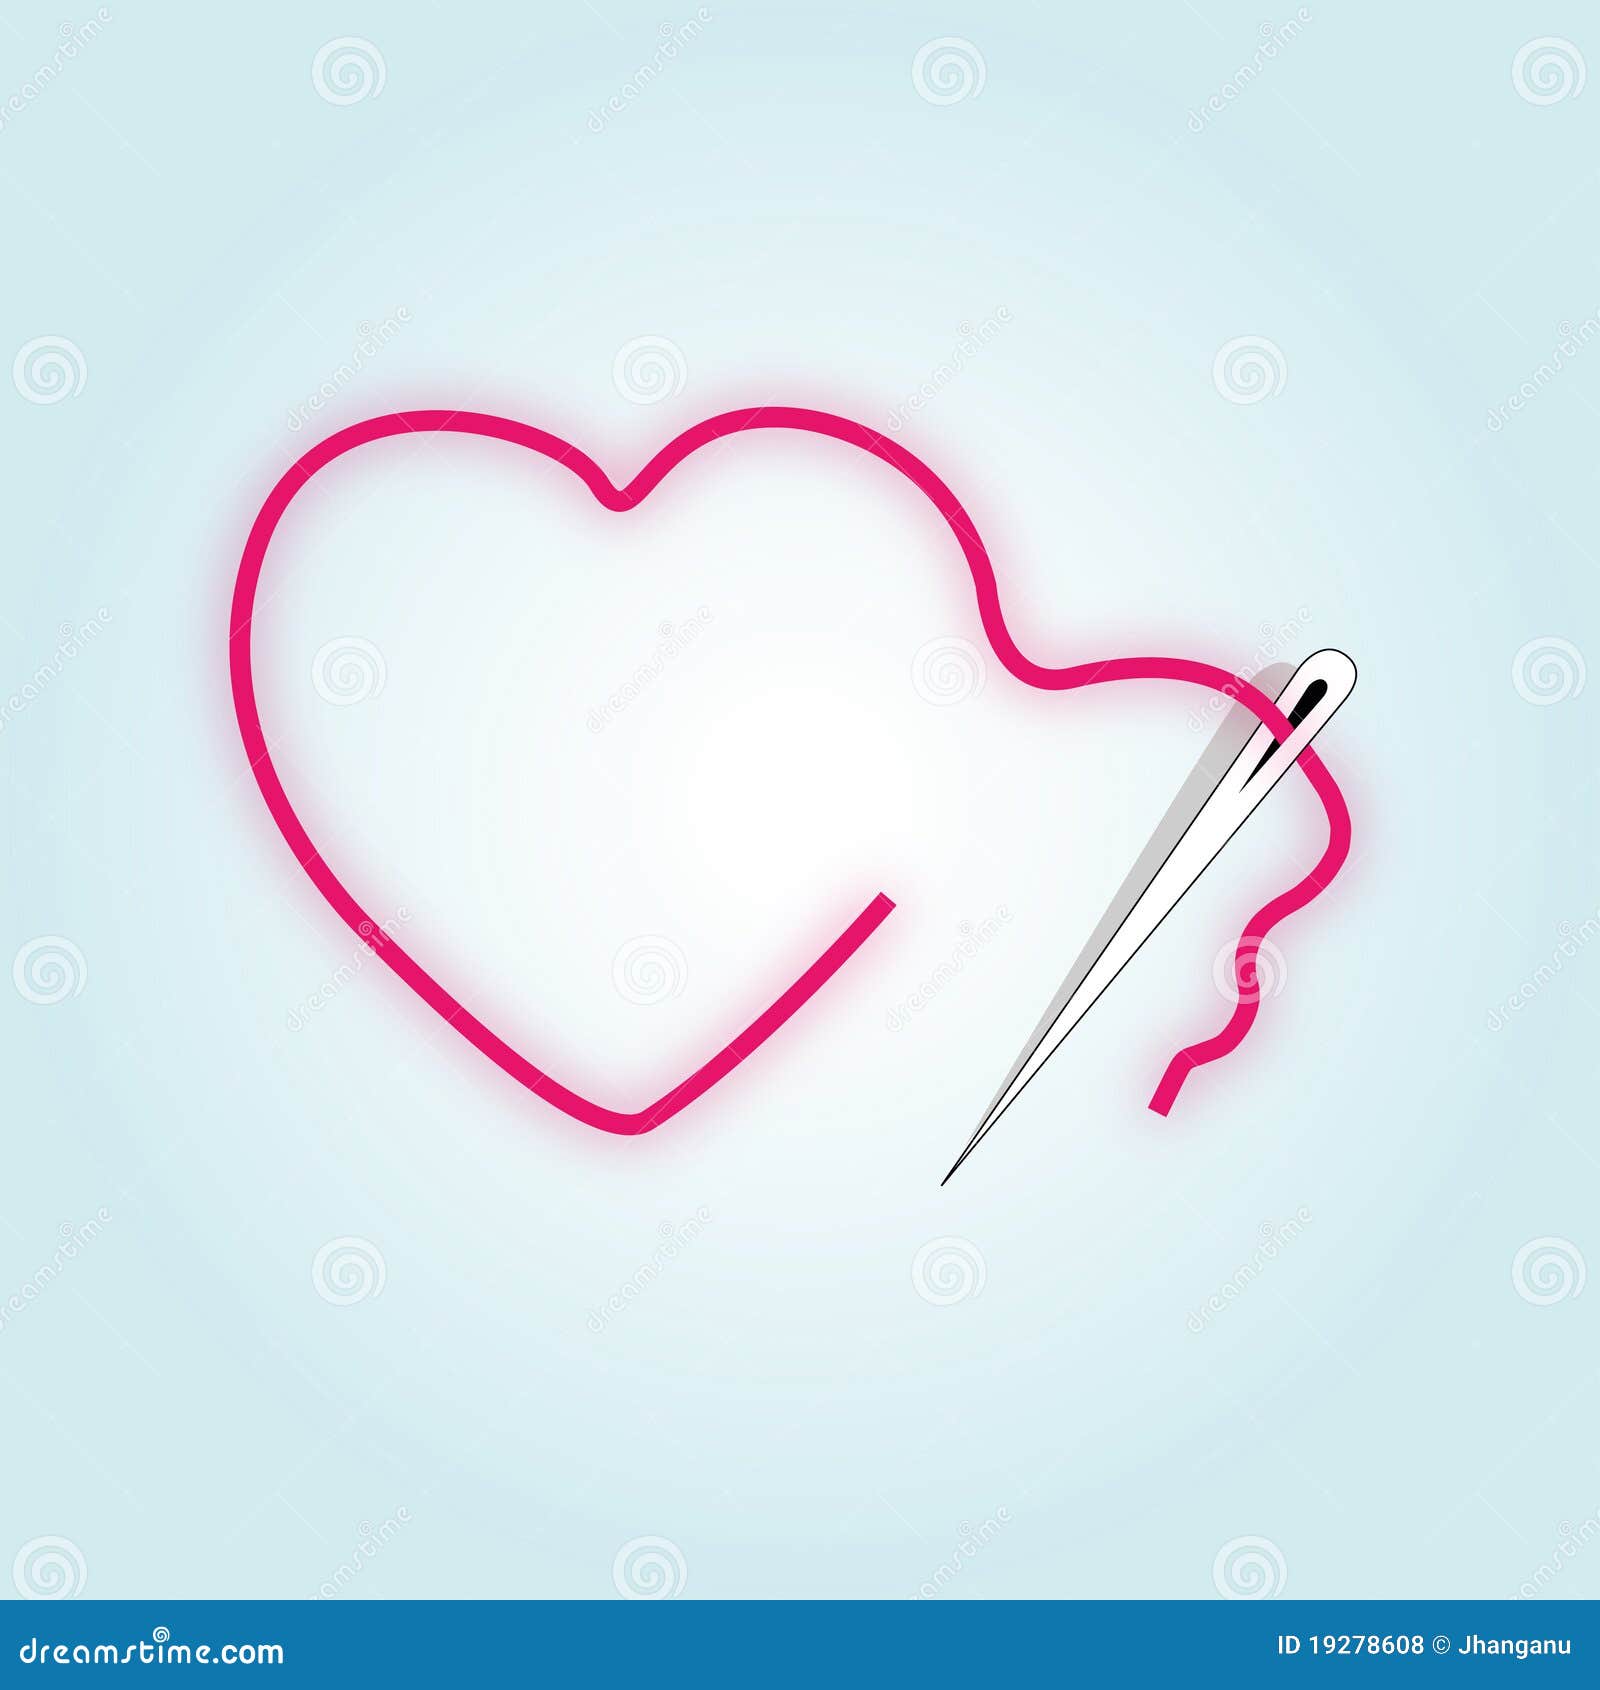 Sewing broken red heart stock vector. Illustration of grungy - 19278608